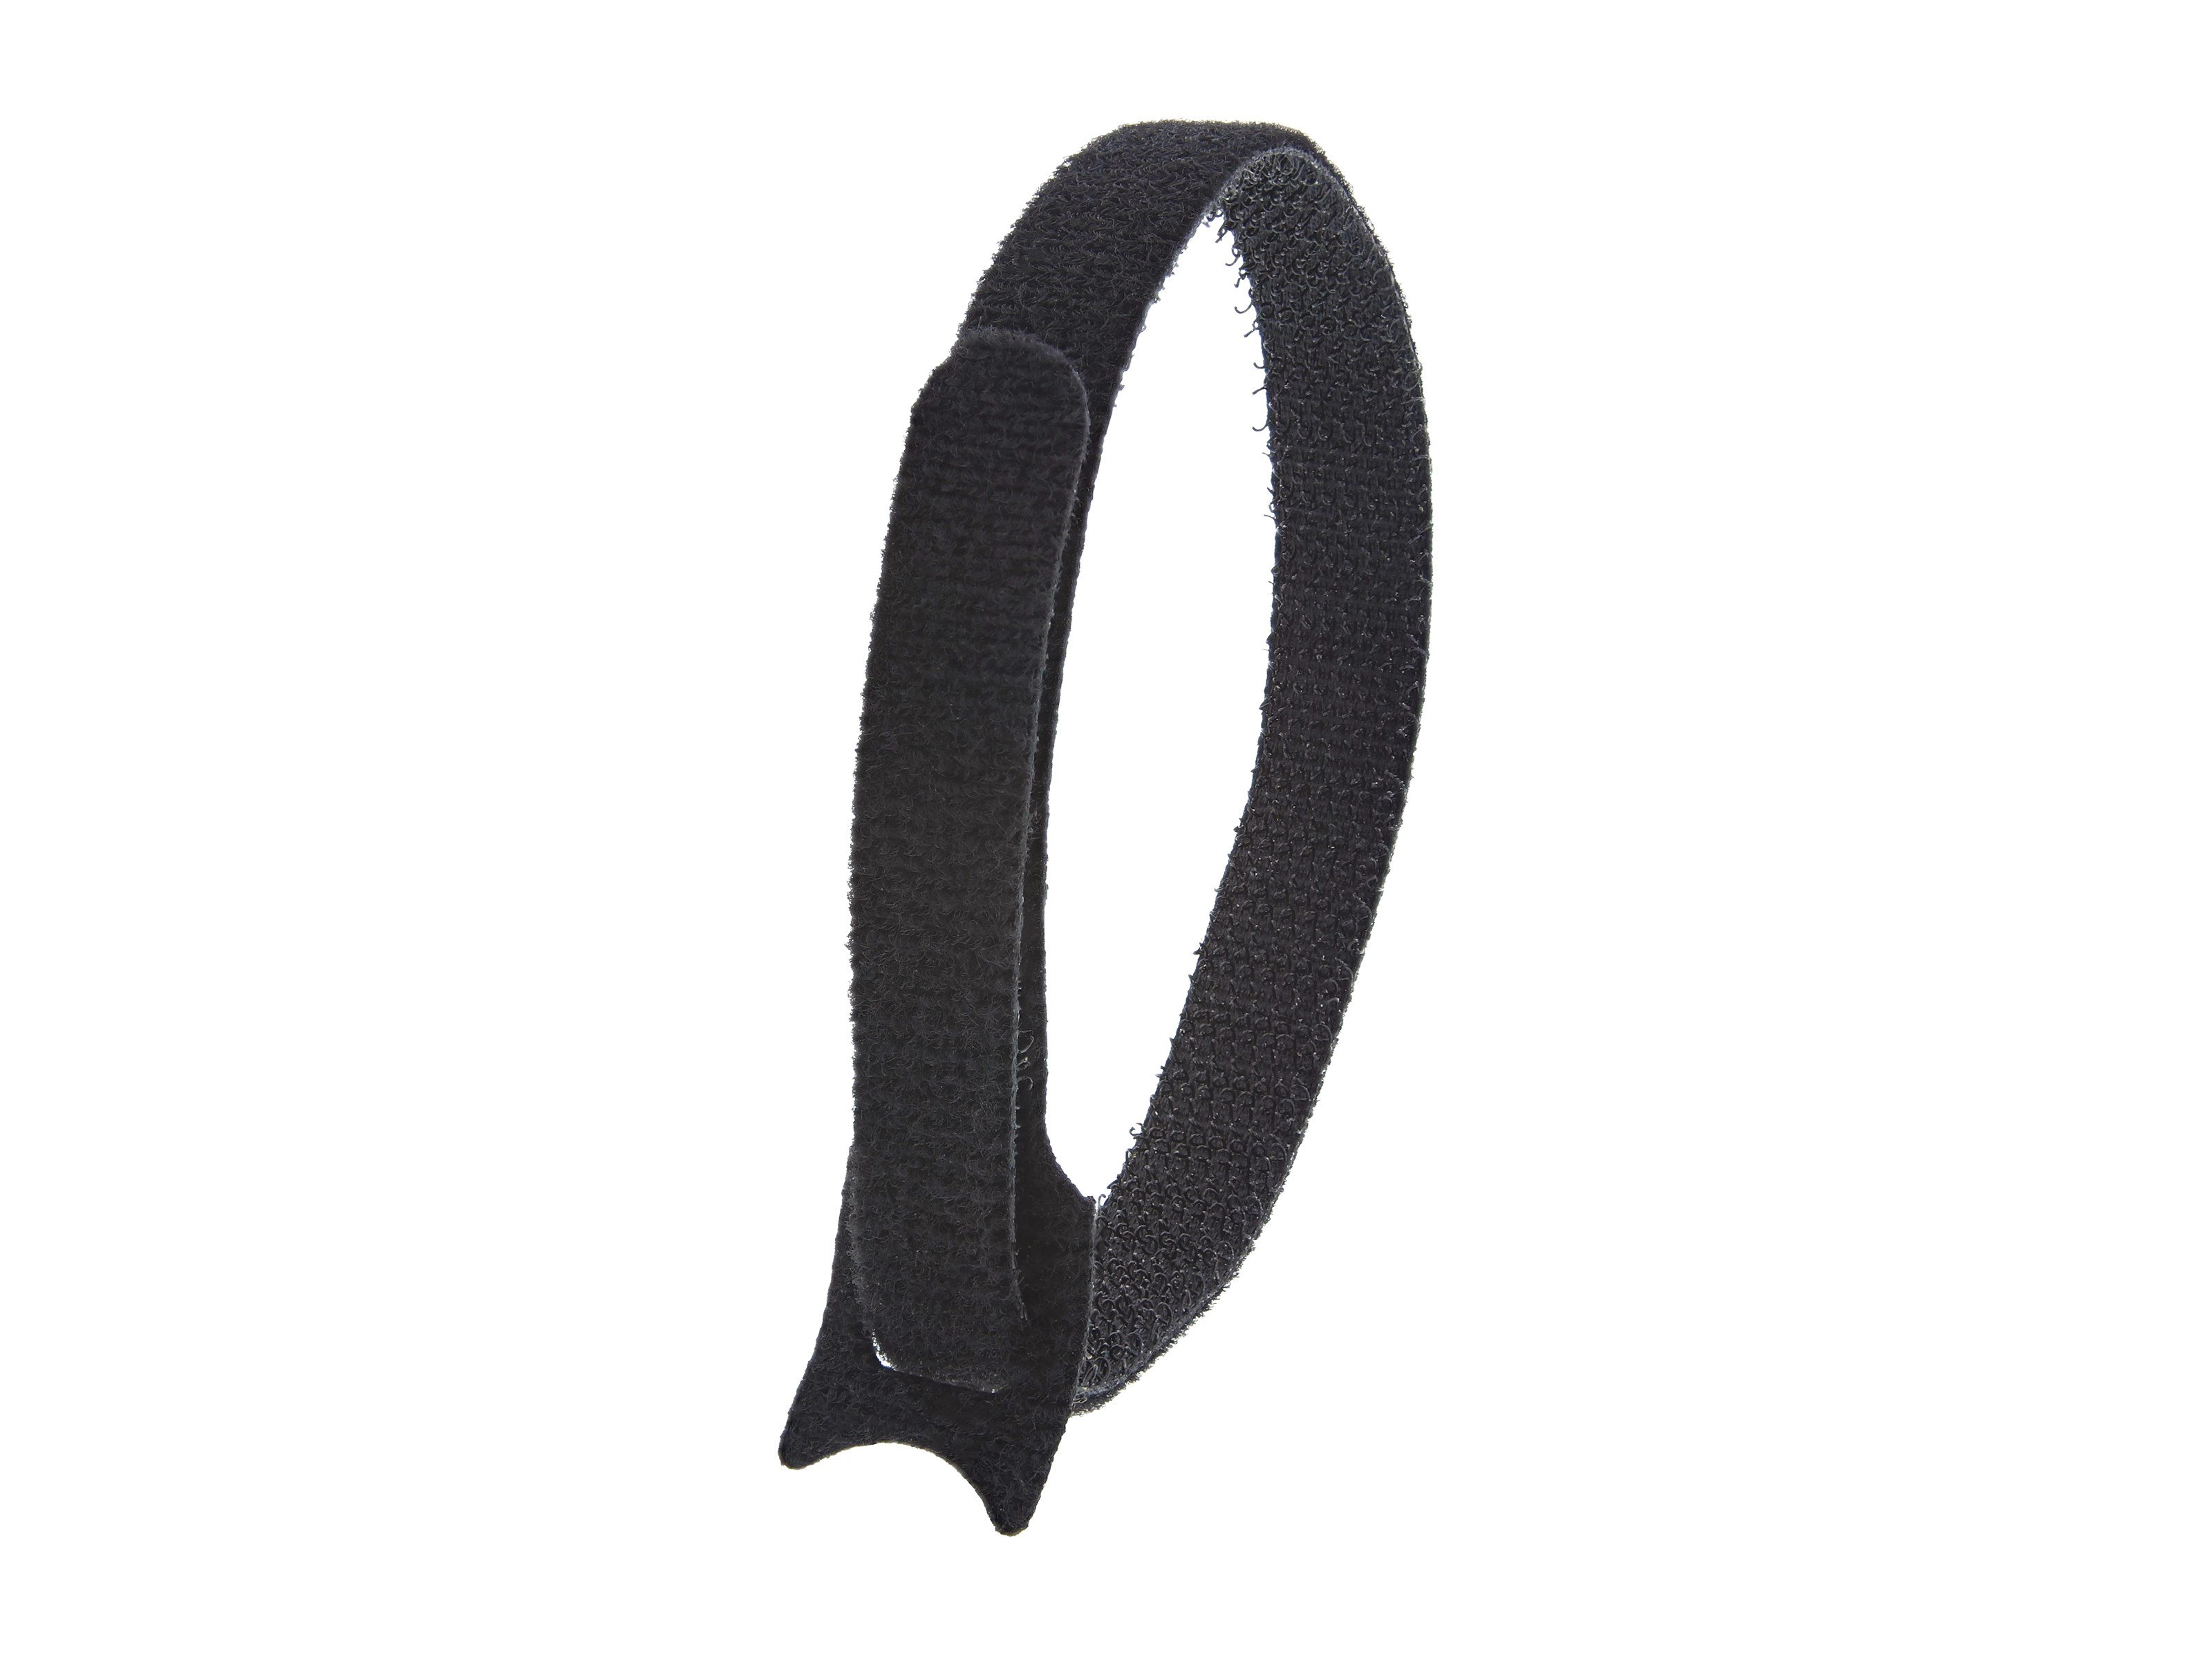 6in Hook and Loop Cable Ties - 50 Pack - Black - Reusable Cable Straps -  Adjustable and Flexible - Cord Organizer Tie/Wraps for Cable Management 